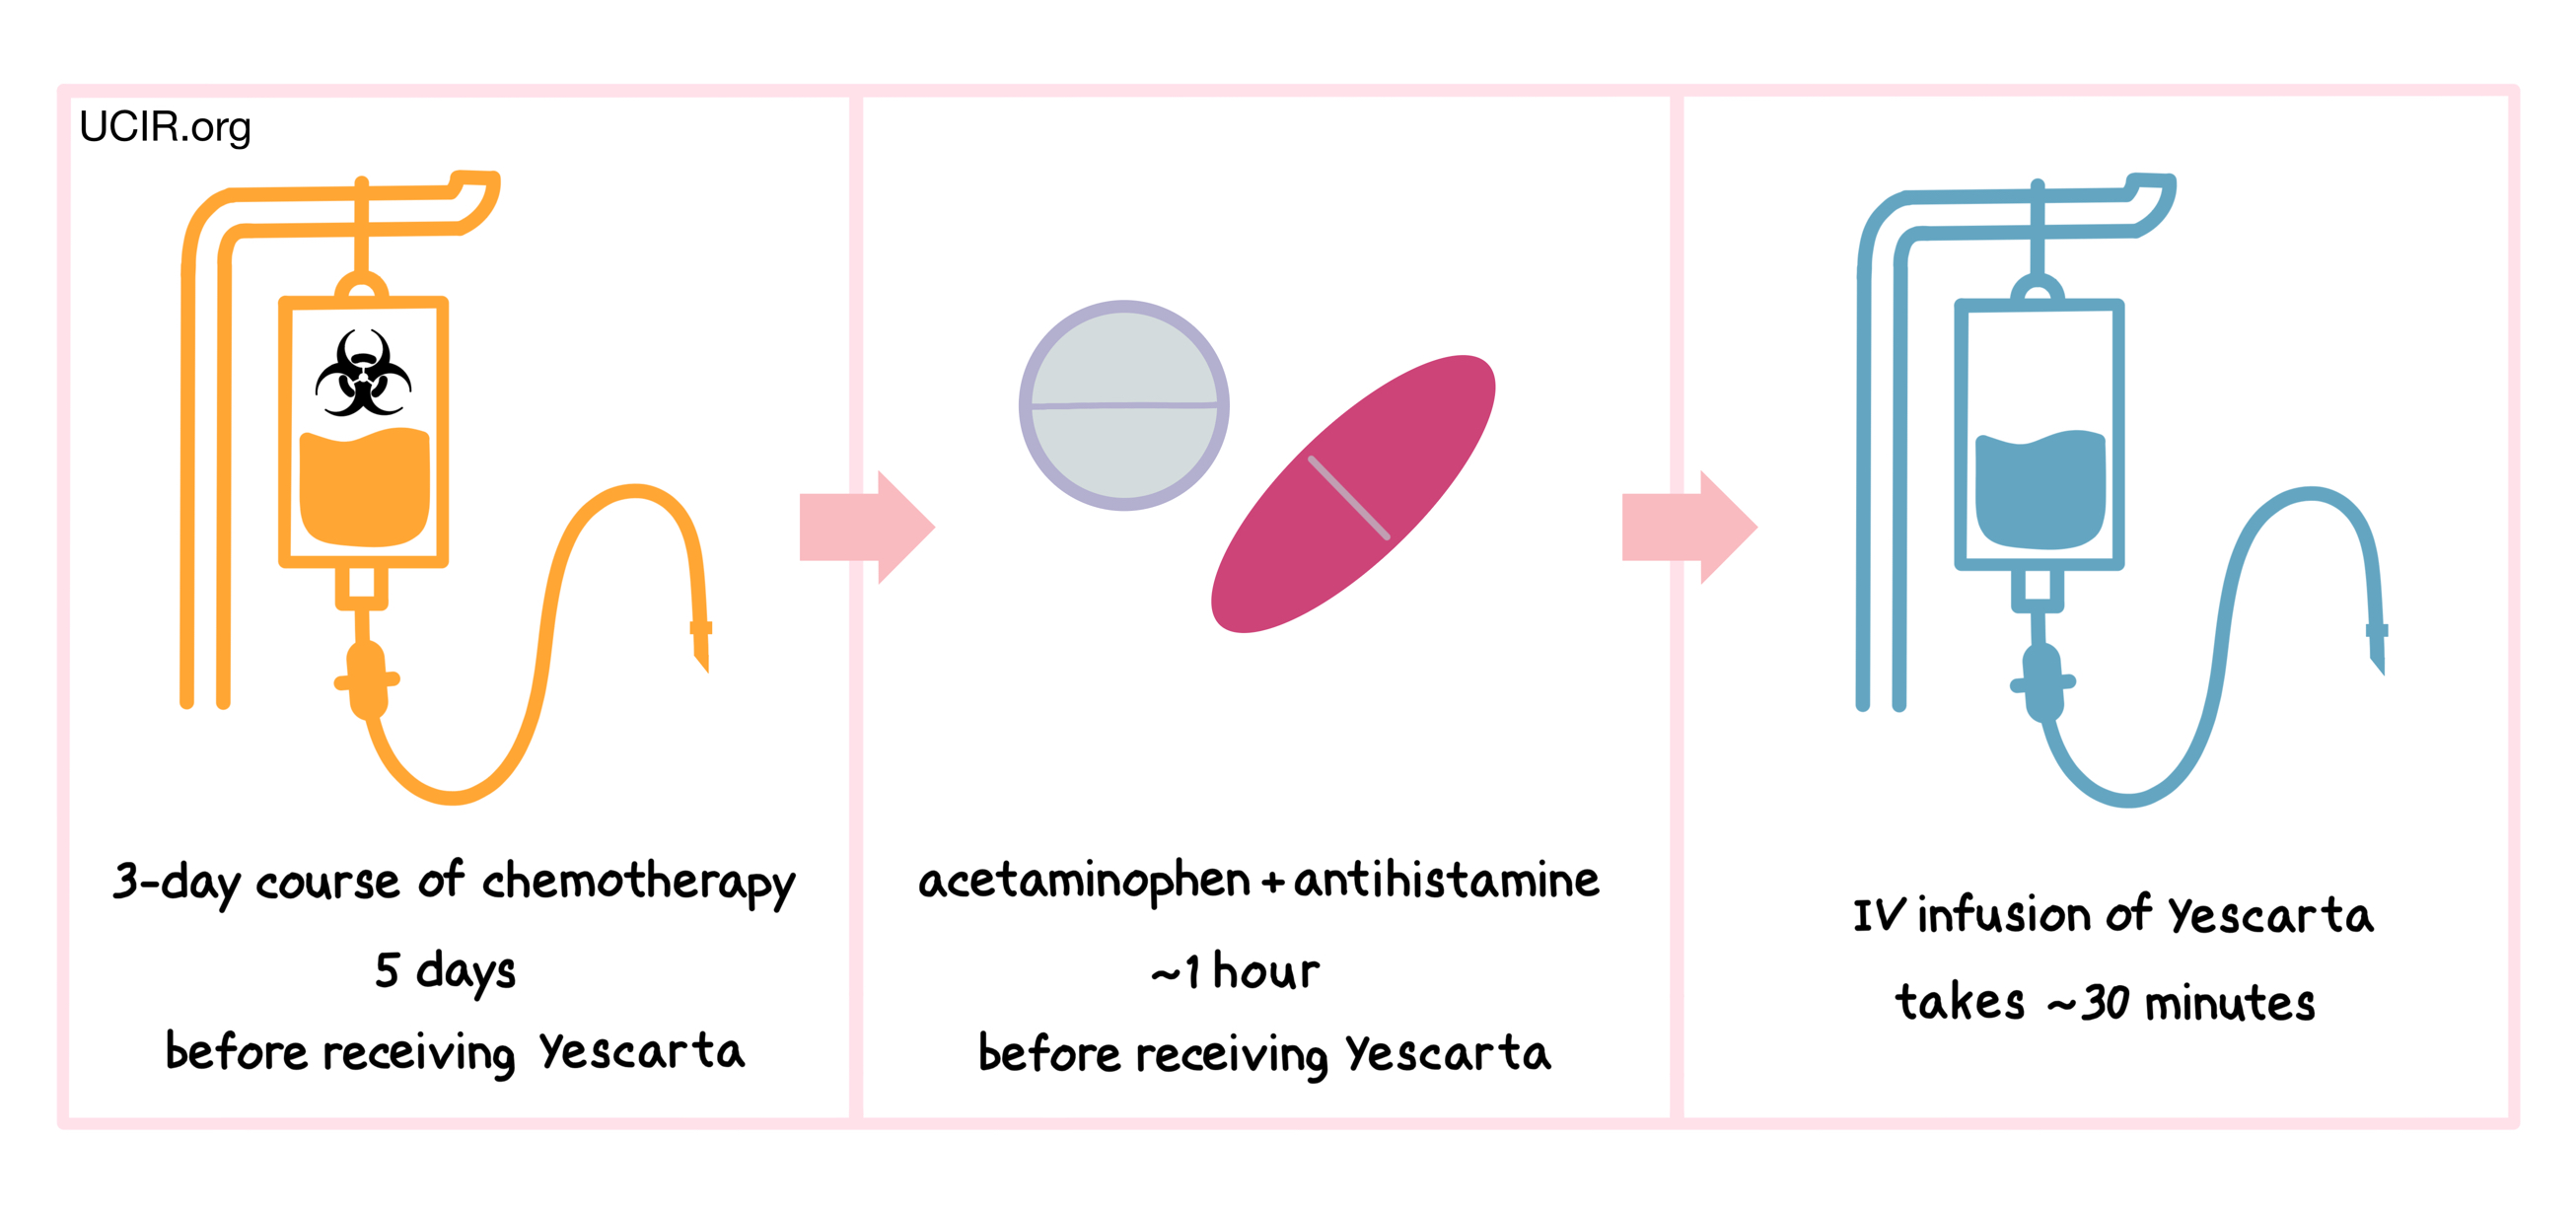 Timeline of IV infusion with Yescarta